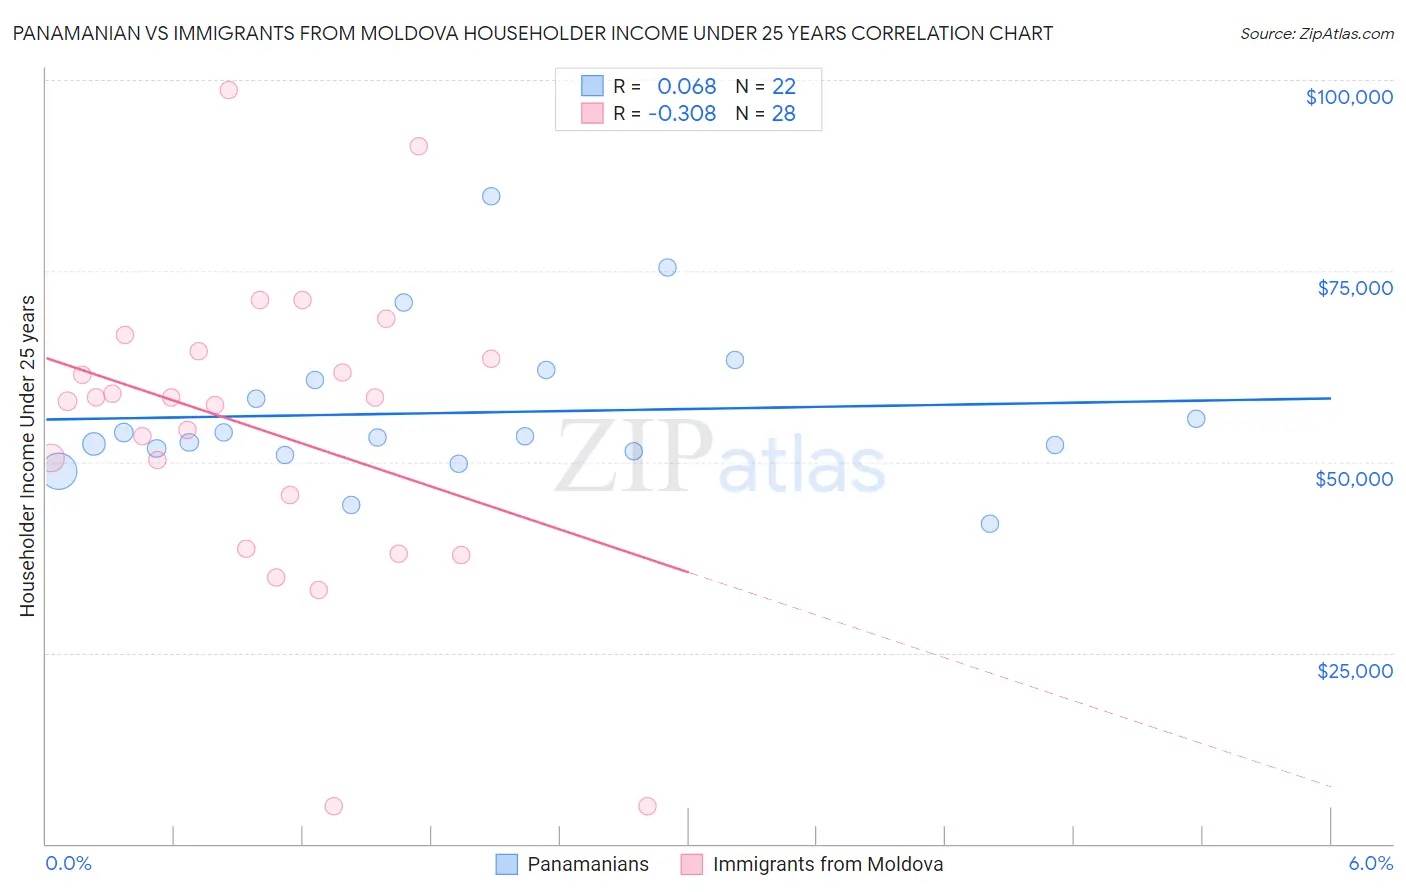 Panamanian vs Immigrants from Moldova Householder Income Under 25 years